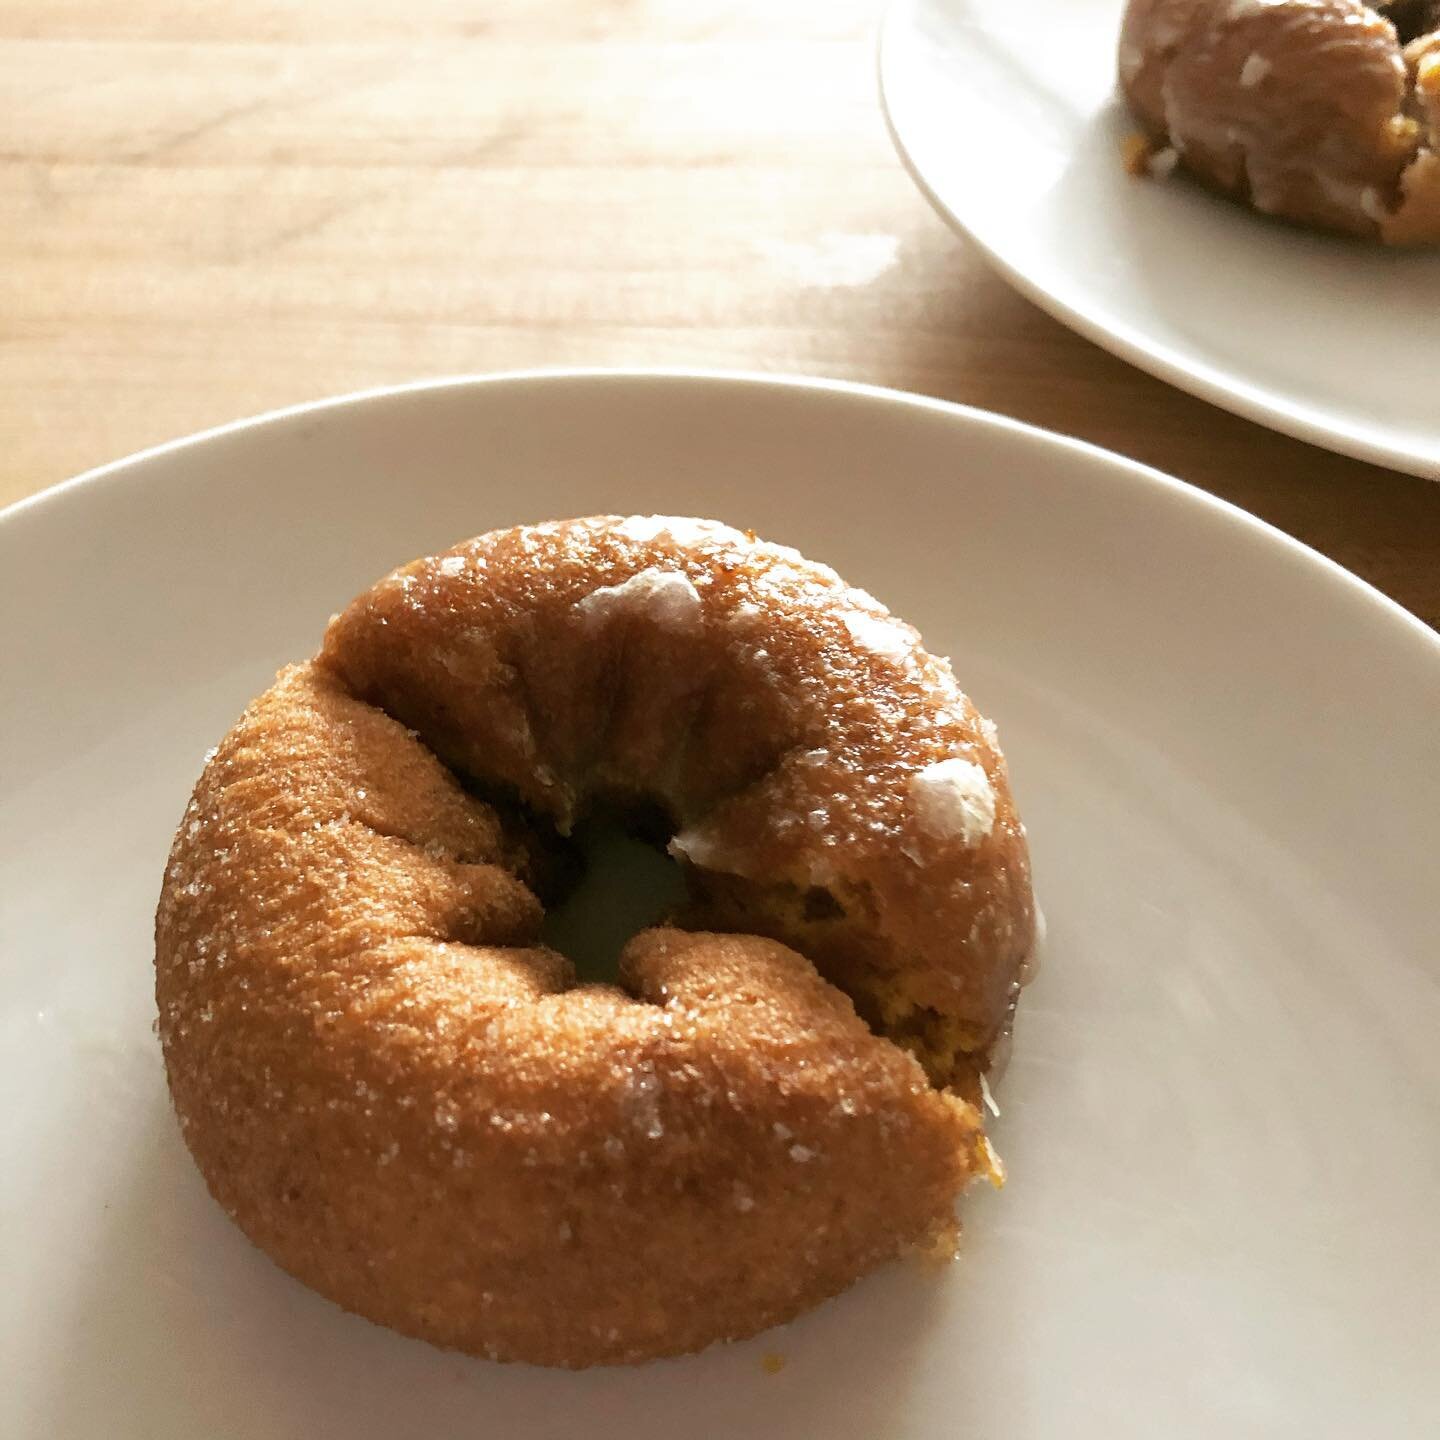 Solving the dilemna of having both apple cider donuts and pumpkin donuts in the house! 🍎🎃🍩 #frankendonut #appleciderdonuts #pumpkindonuts #donuts #itsalive #itsdelicious